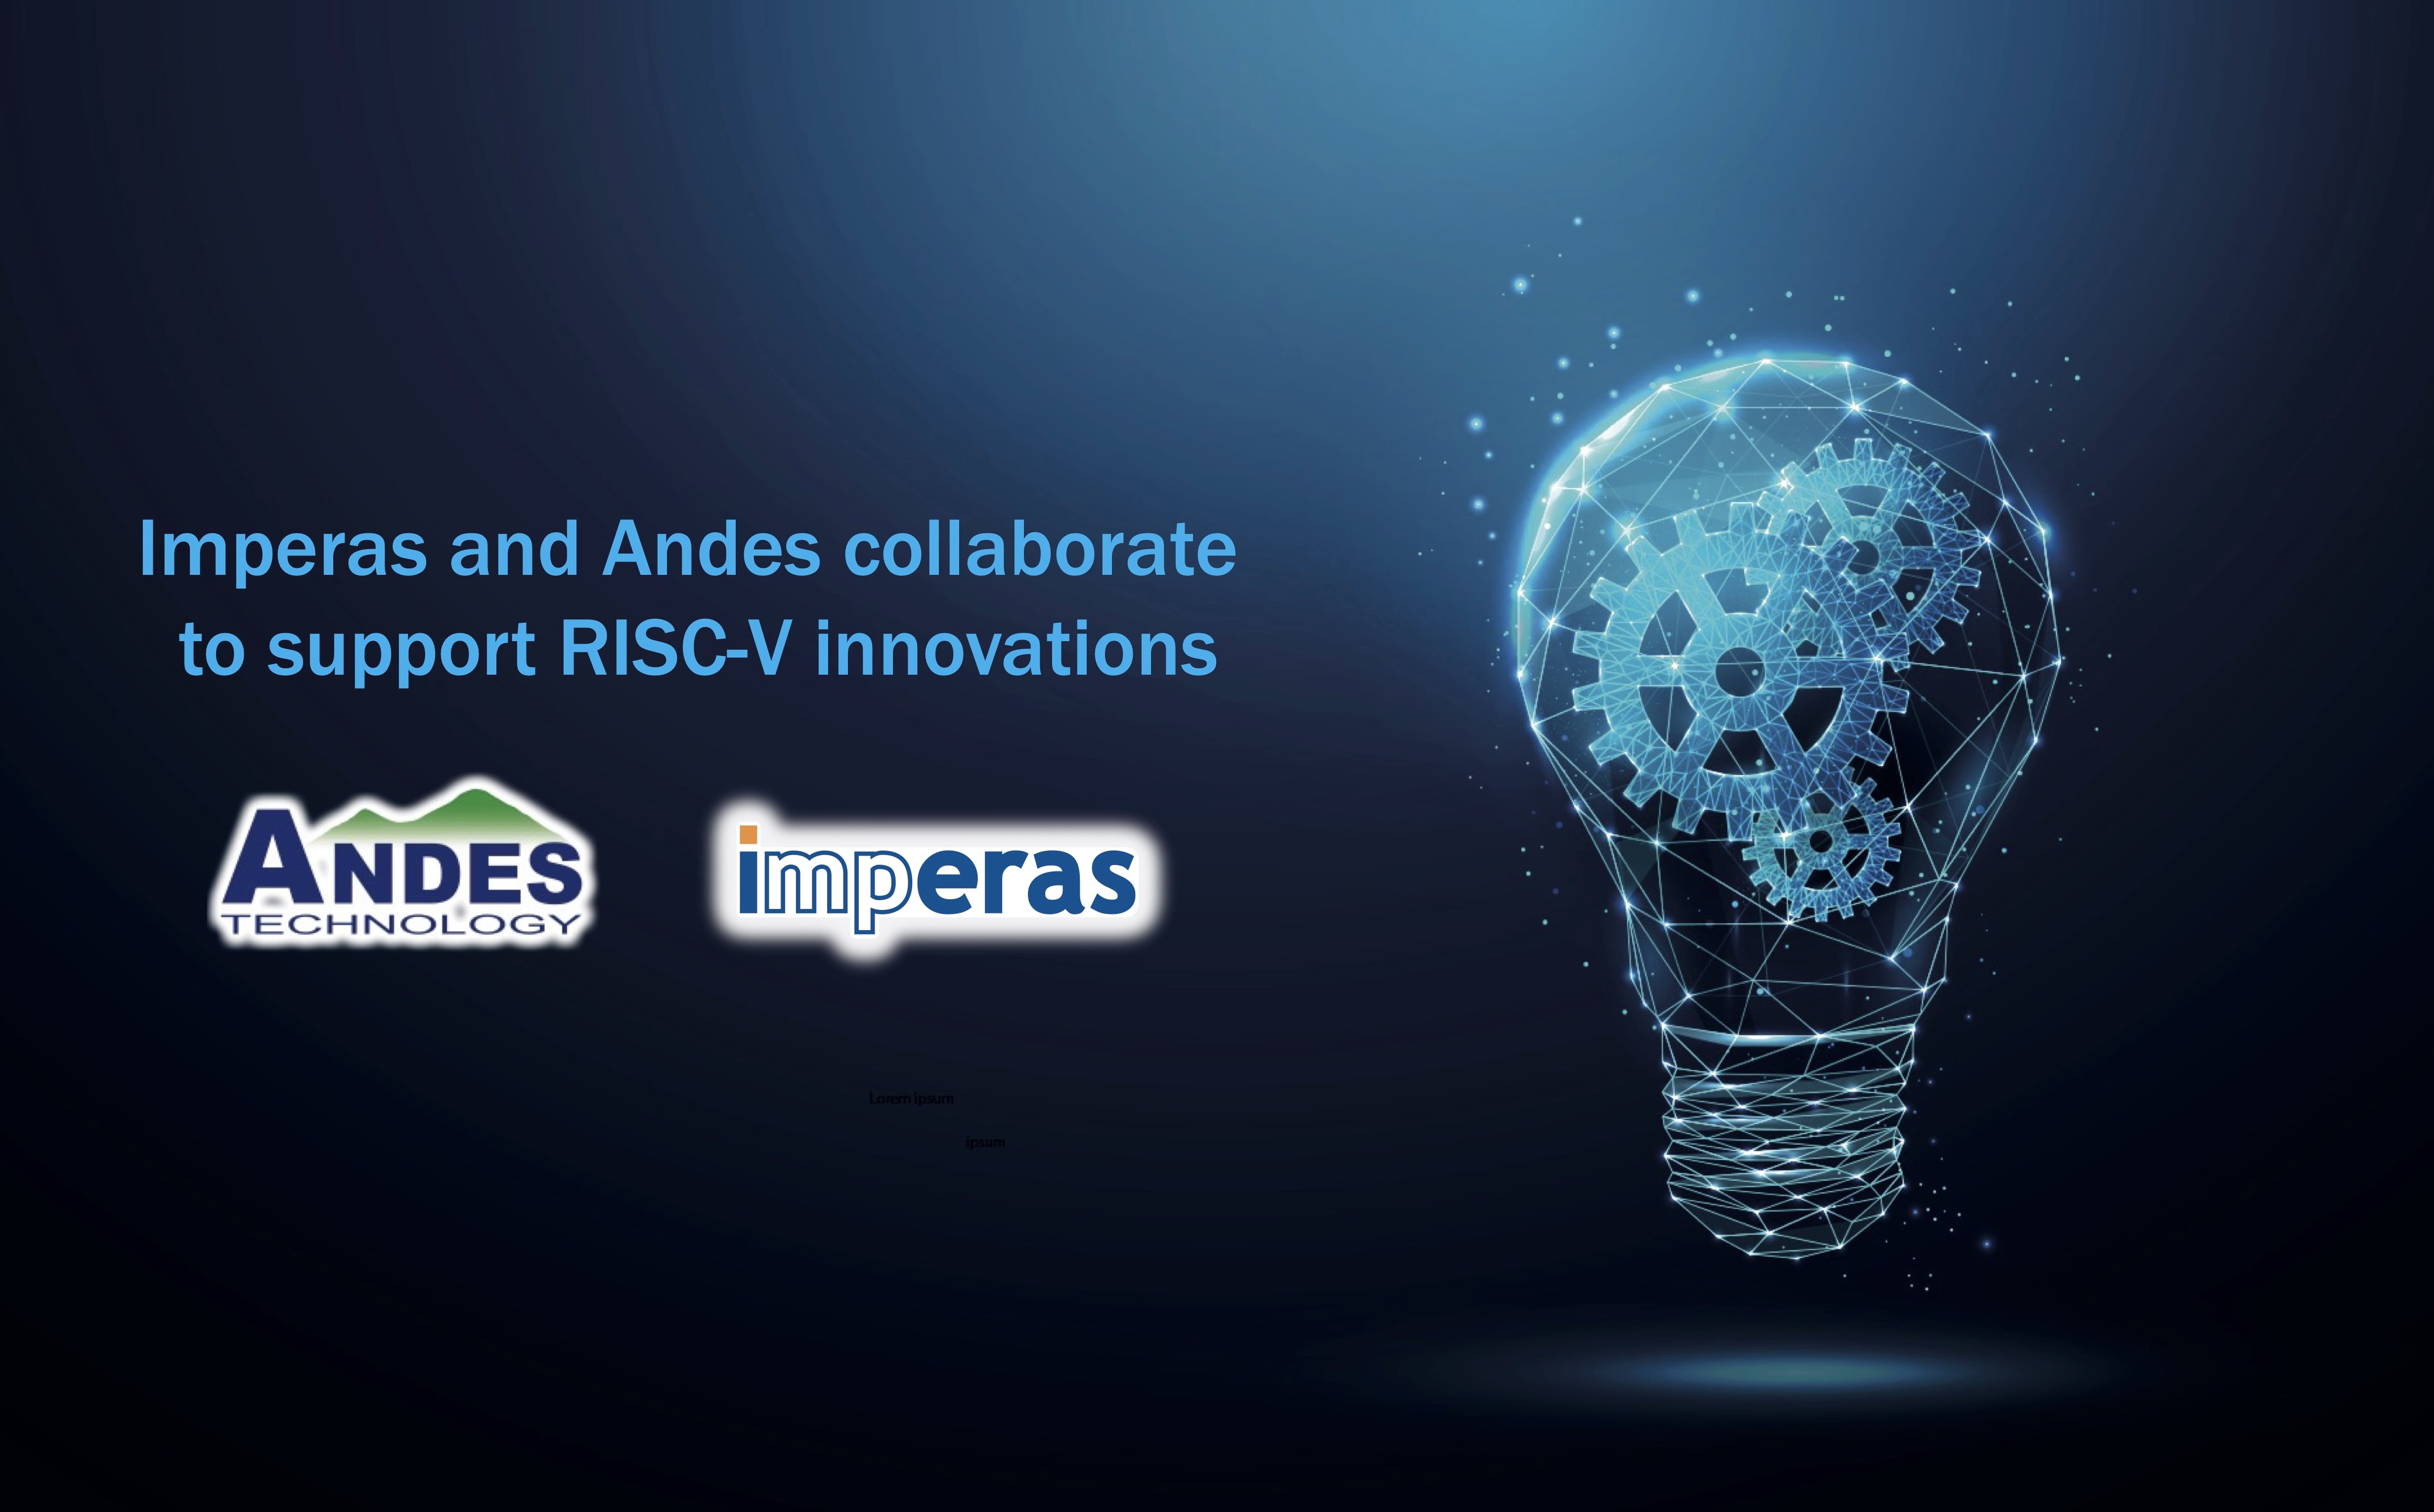 Imperas and Andes for RISC-V Innovation